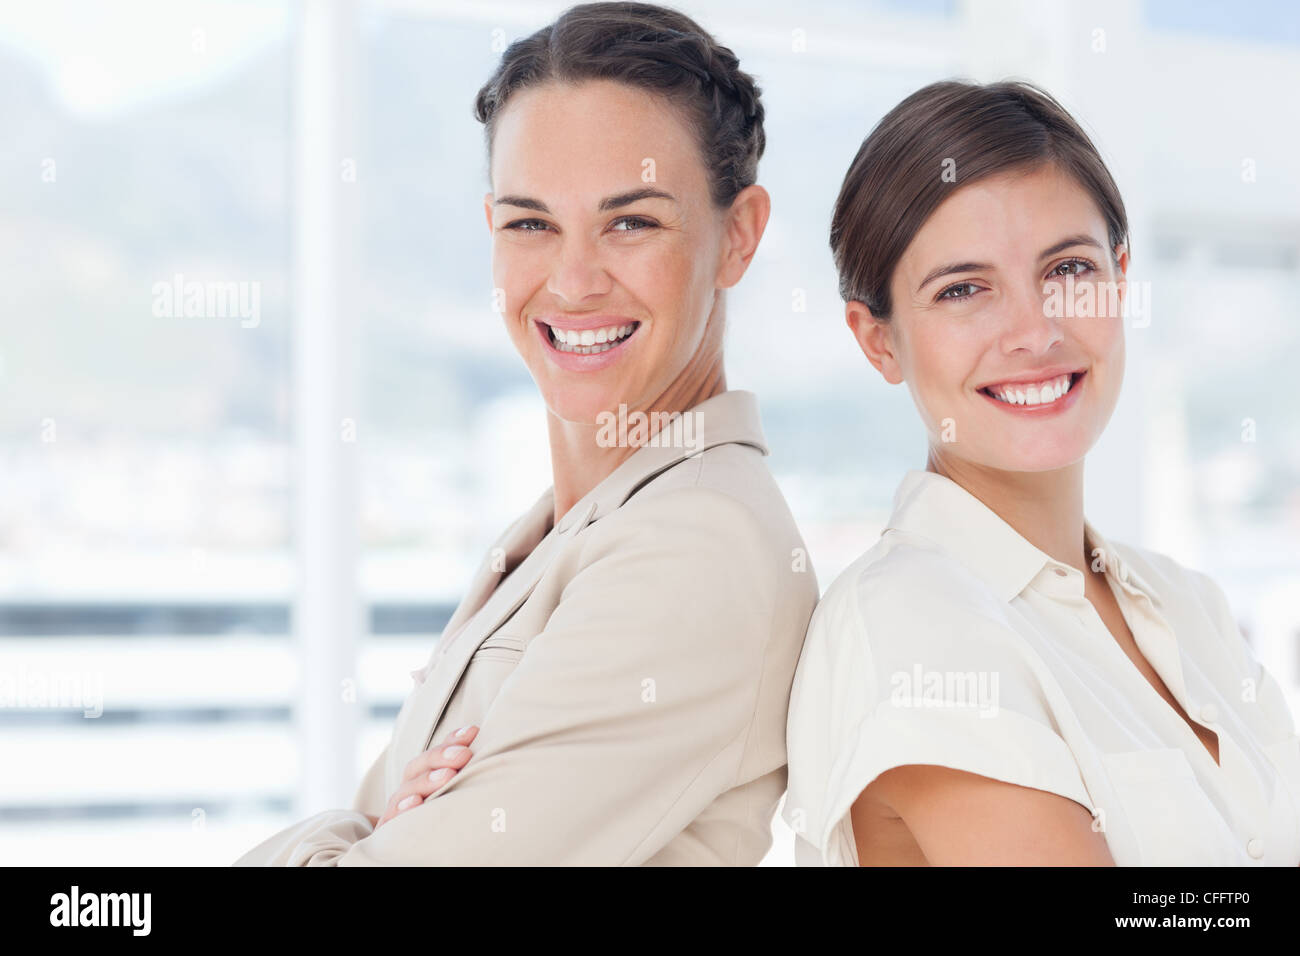 Smiling businesswomen with arms folded standing back to back Stock Photo